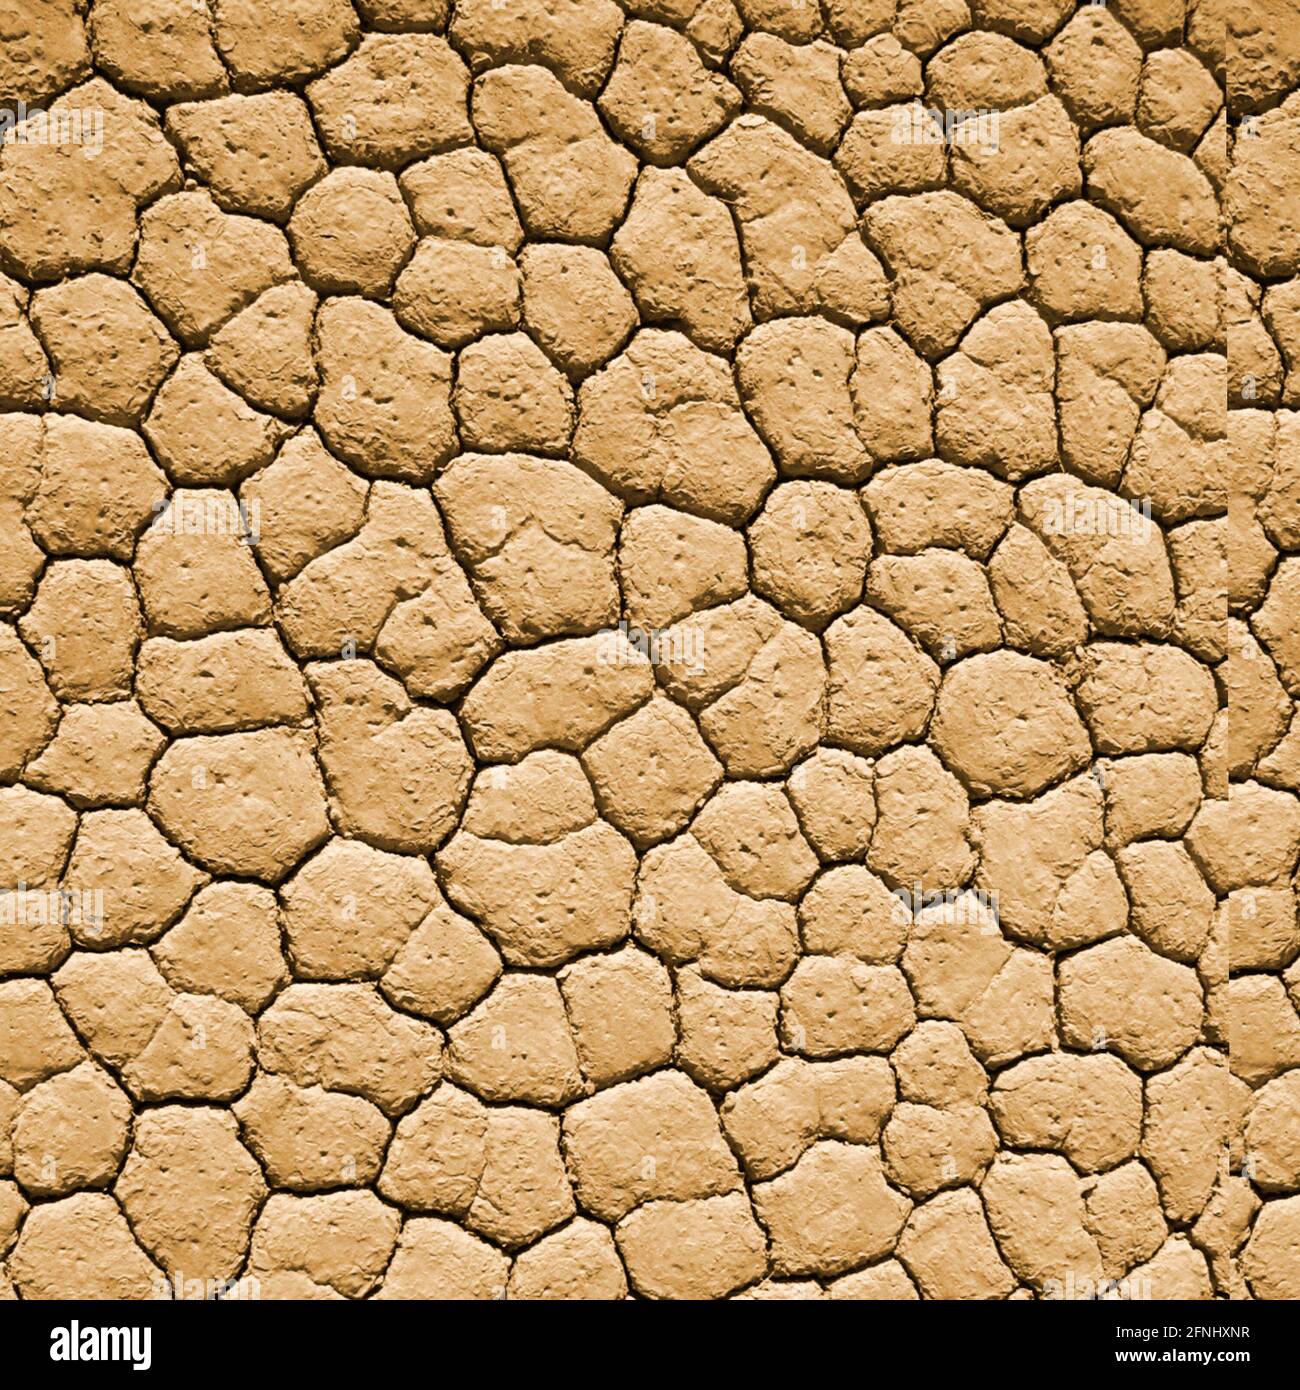 dry earth, texture and pattern, 3d illustrations Stock Photo